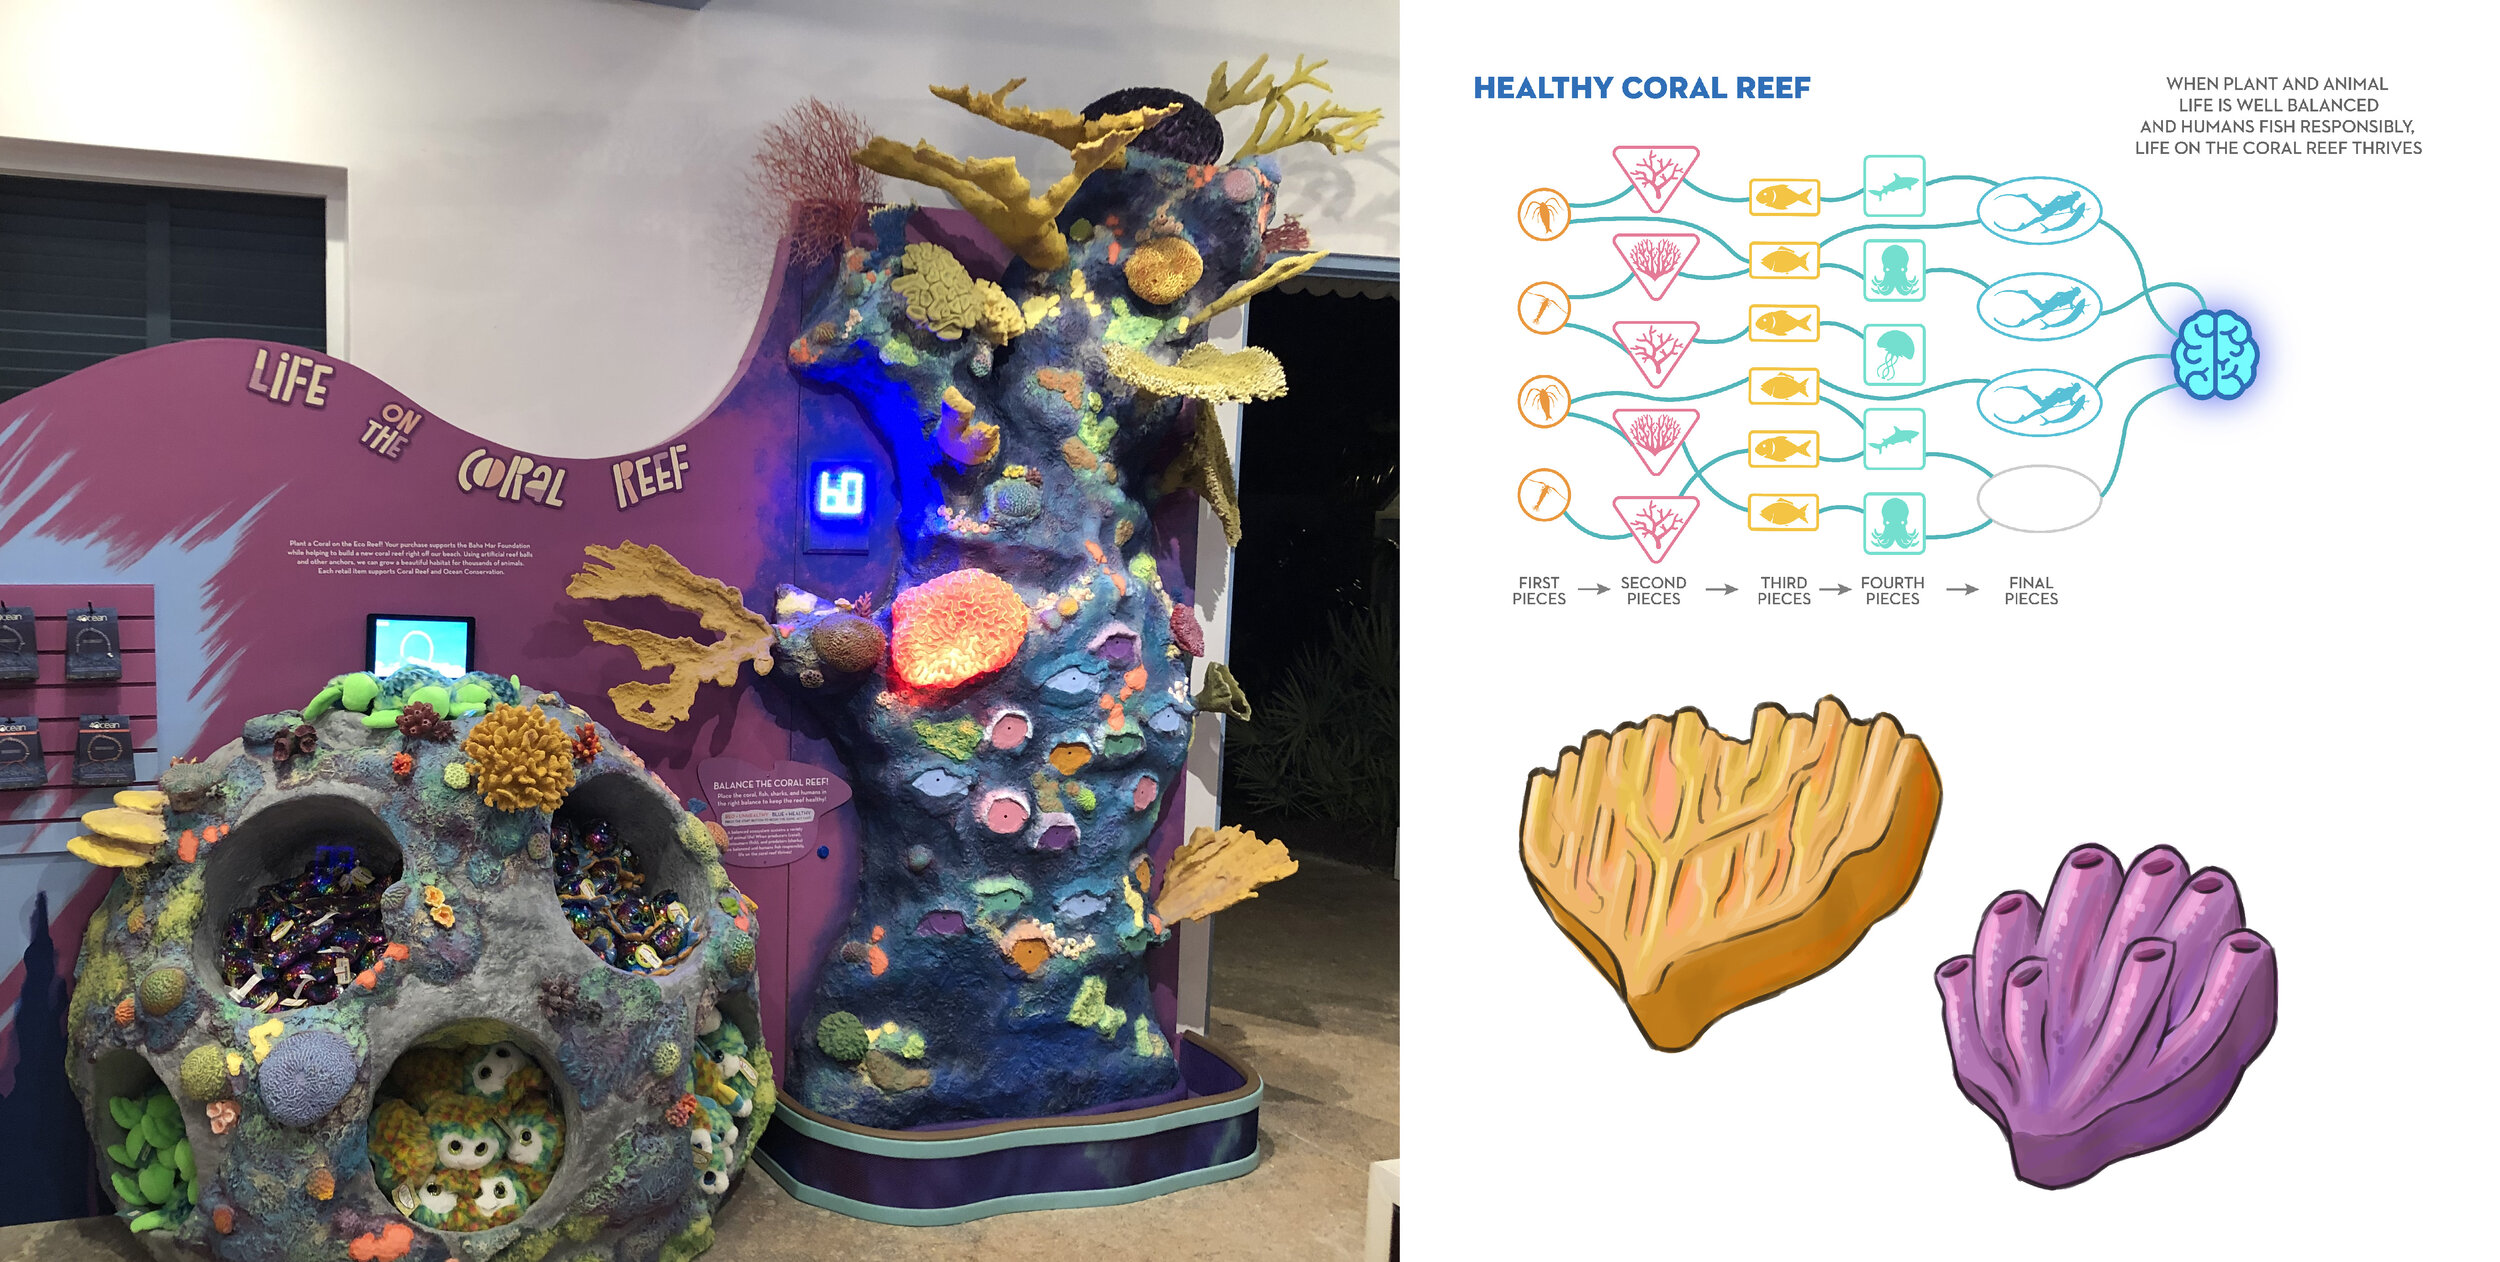  An iconic feature of the space is a game for young guests to learn about the coral reefs that blanket the ocean floor of the Bahamas. By placing pieces in the correct order and quantities, we learn how important a balanced ecosystem is for a coral r